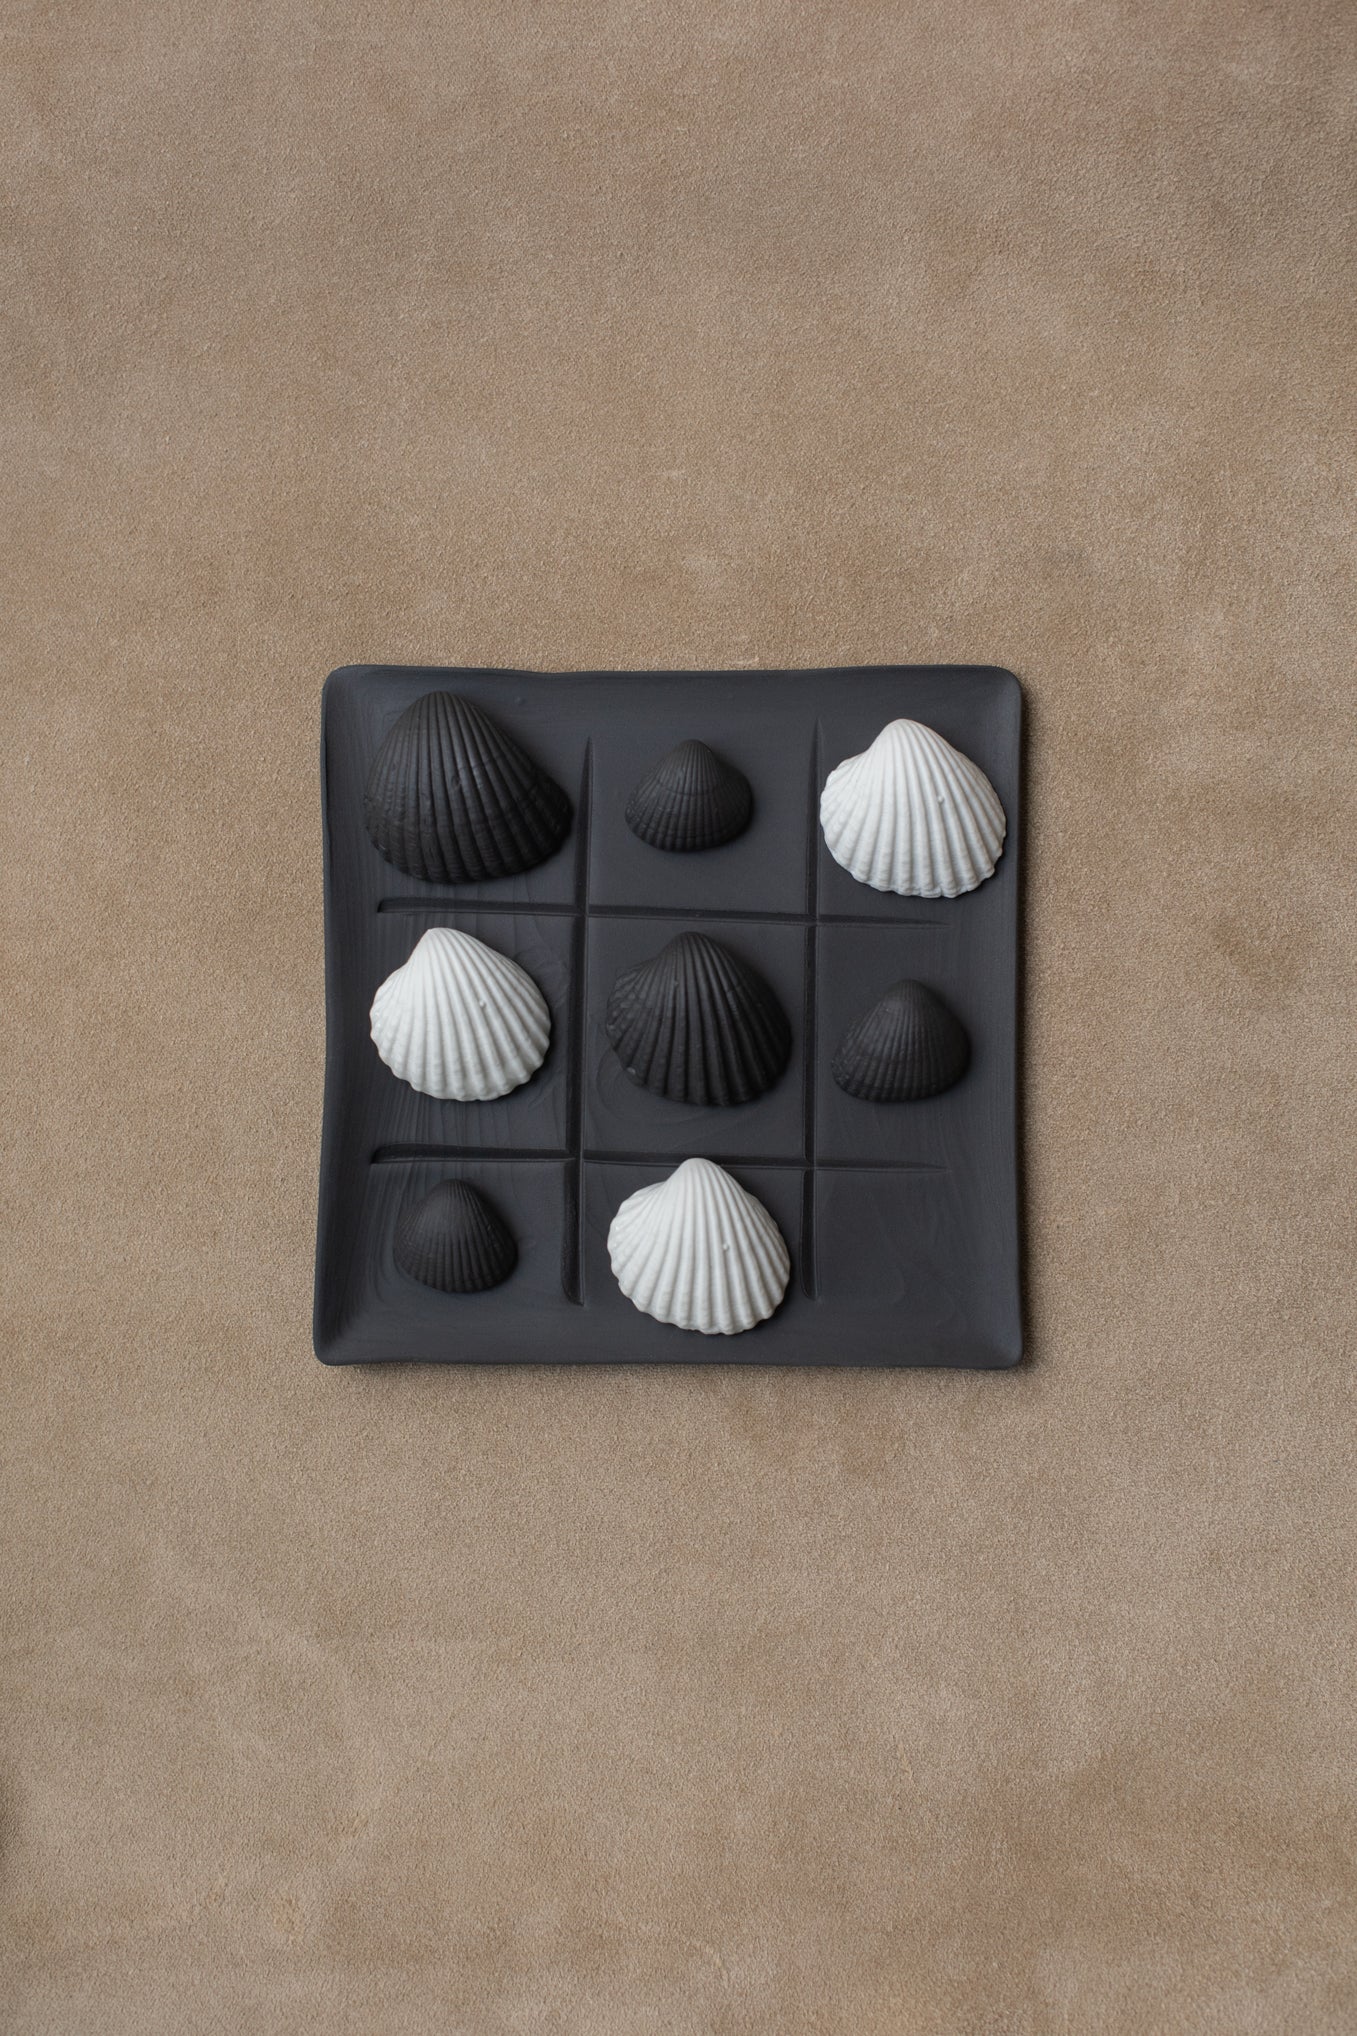 DAY AND NIGHT PORCELAIN SHELL TIC-TAC-TOE SET